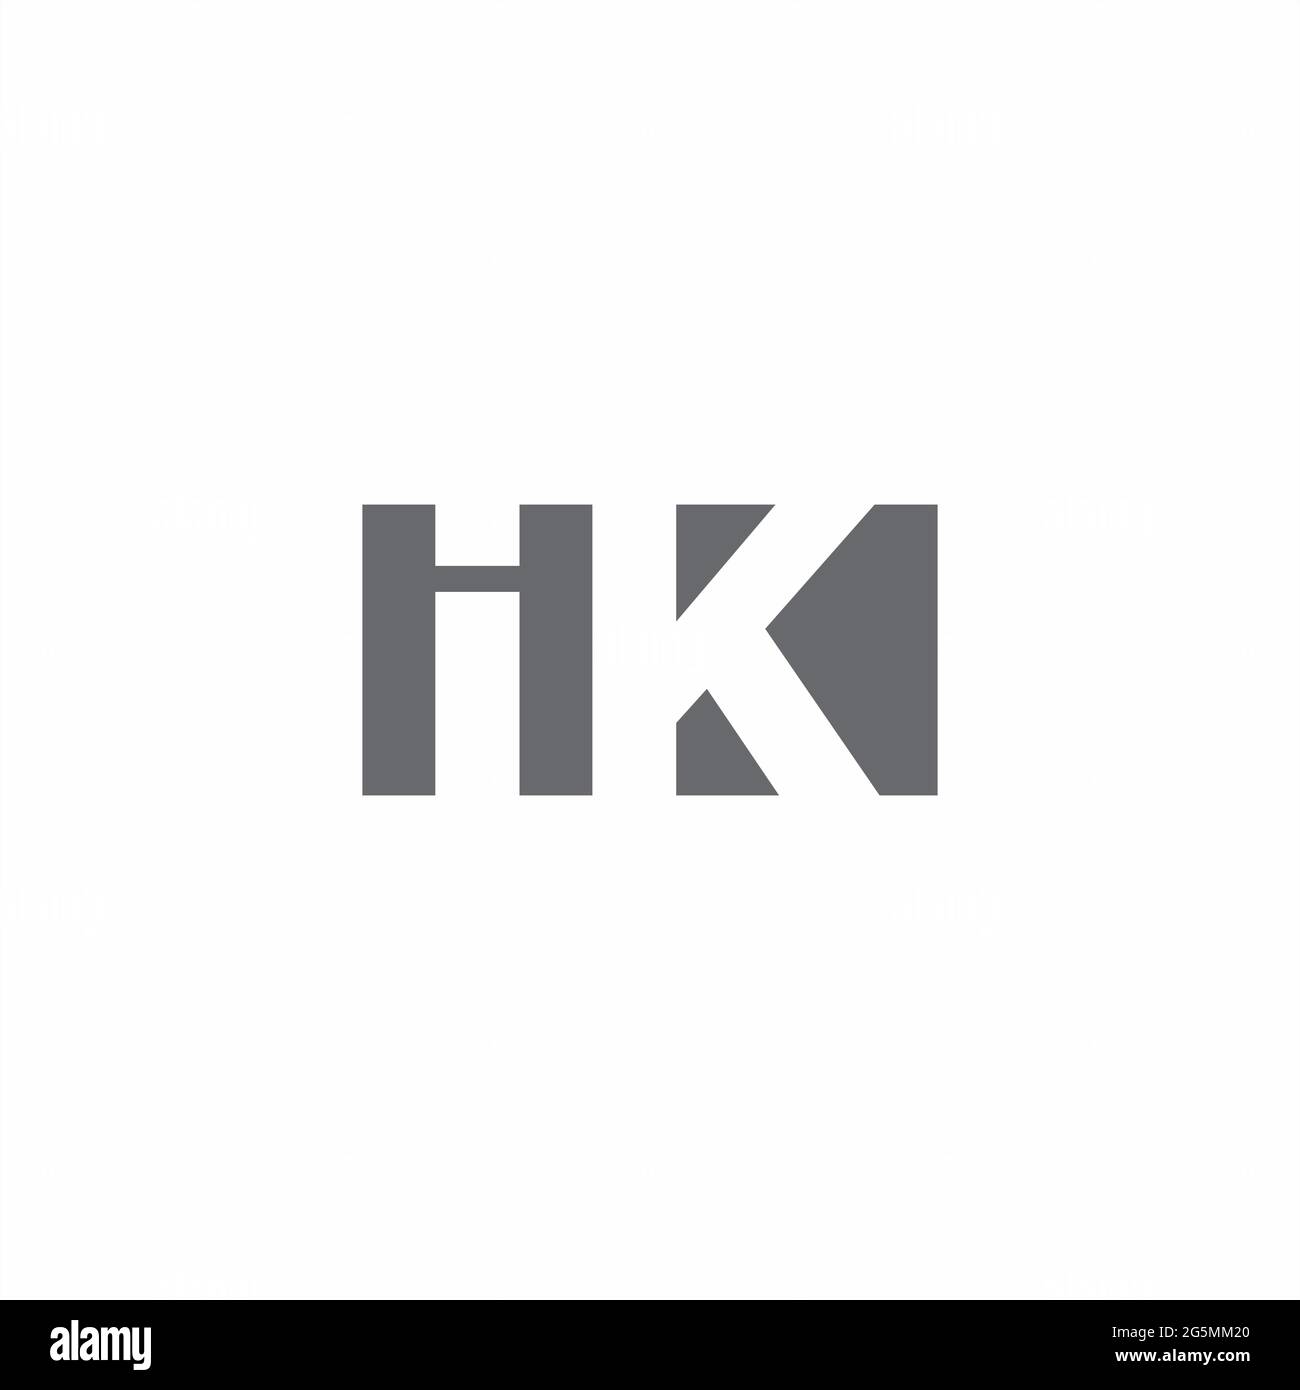 IK Logo monogram with negative space style design template isolated on white background Stock Vector